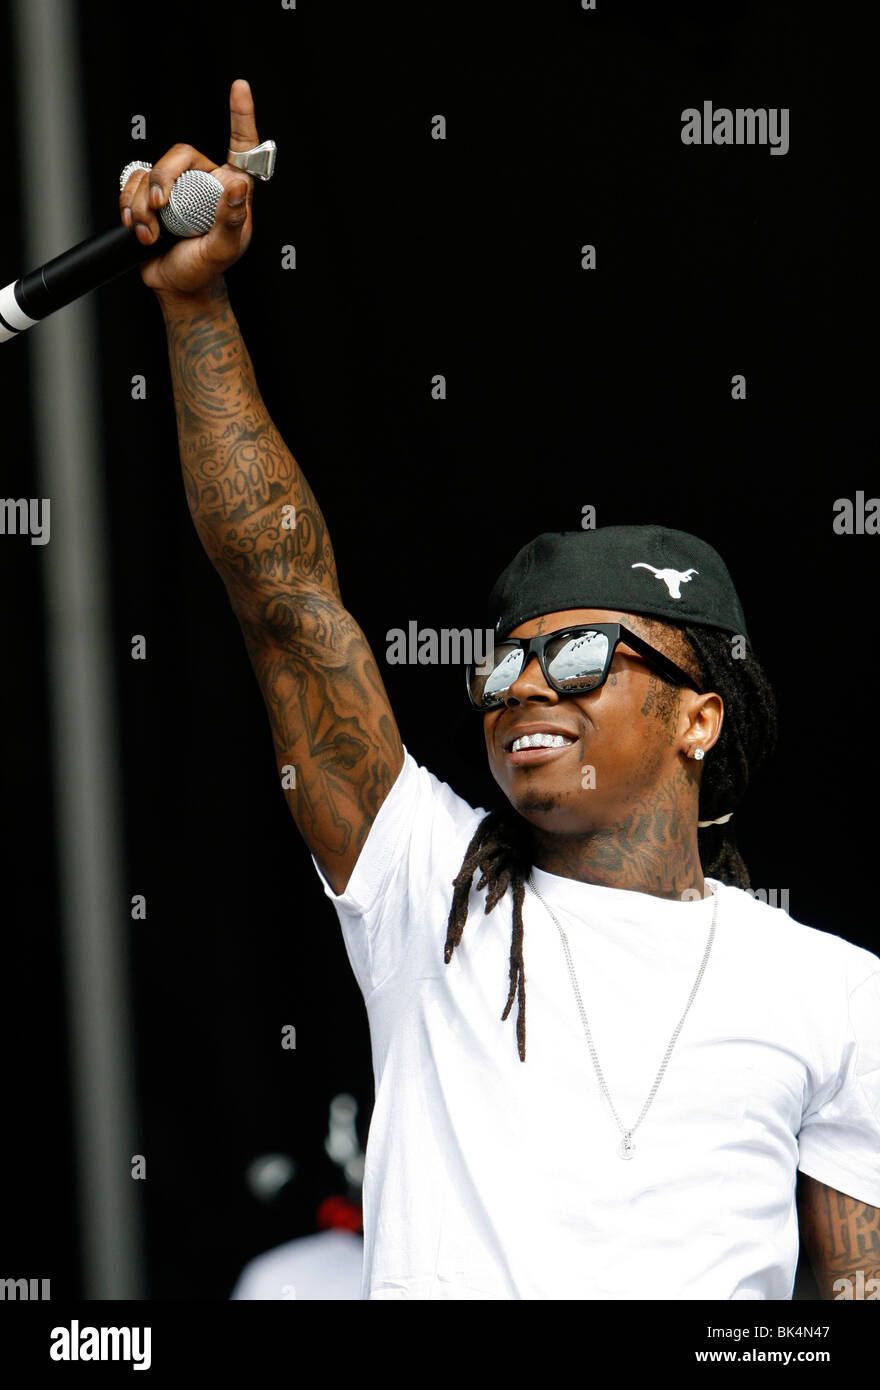 Lil' Wayne performs during a concert. Stock Photo